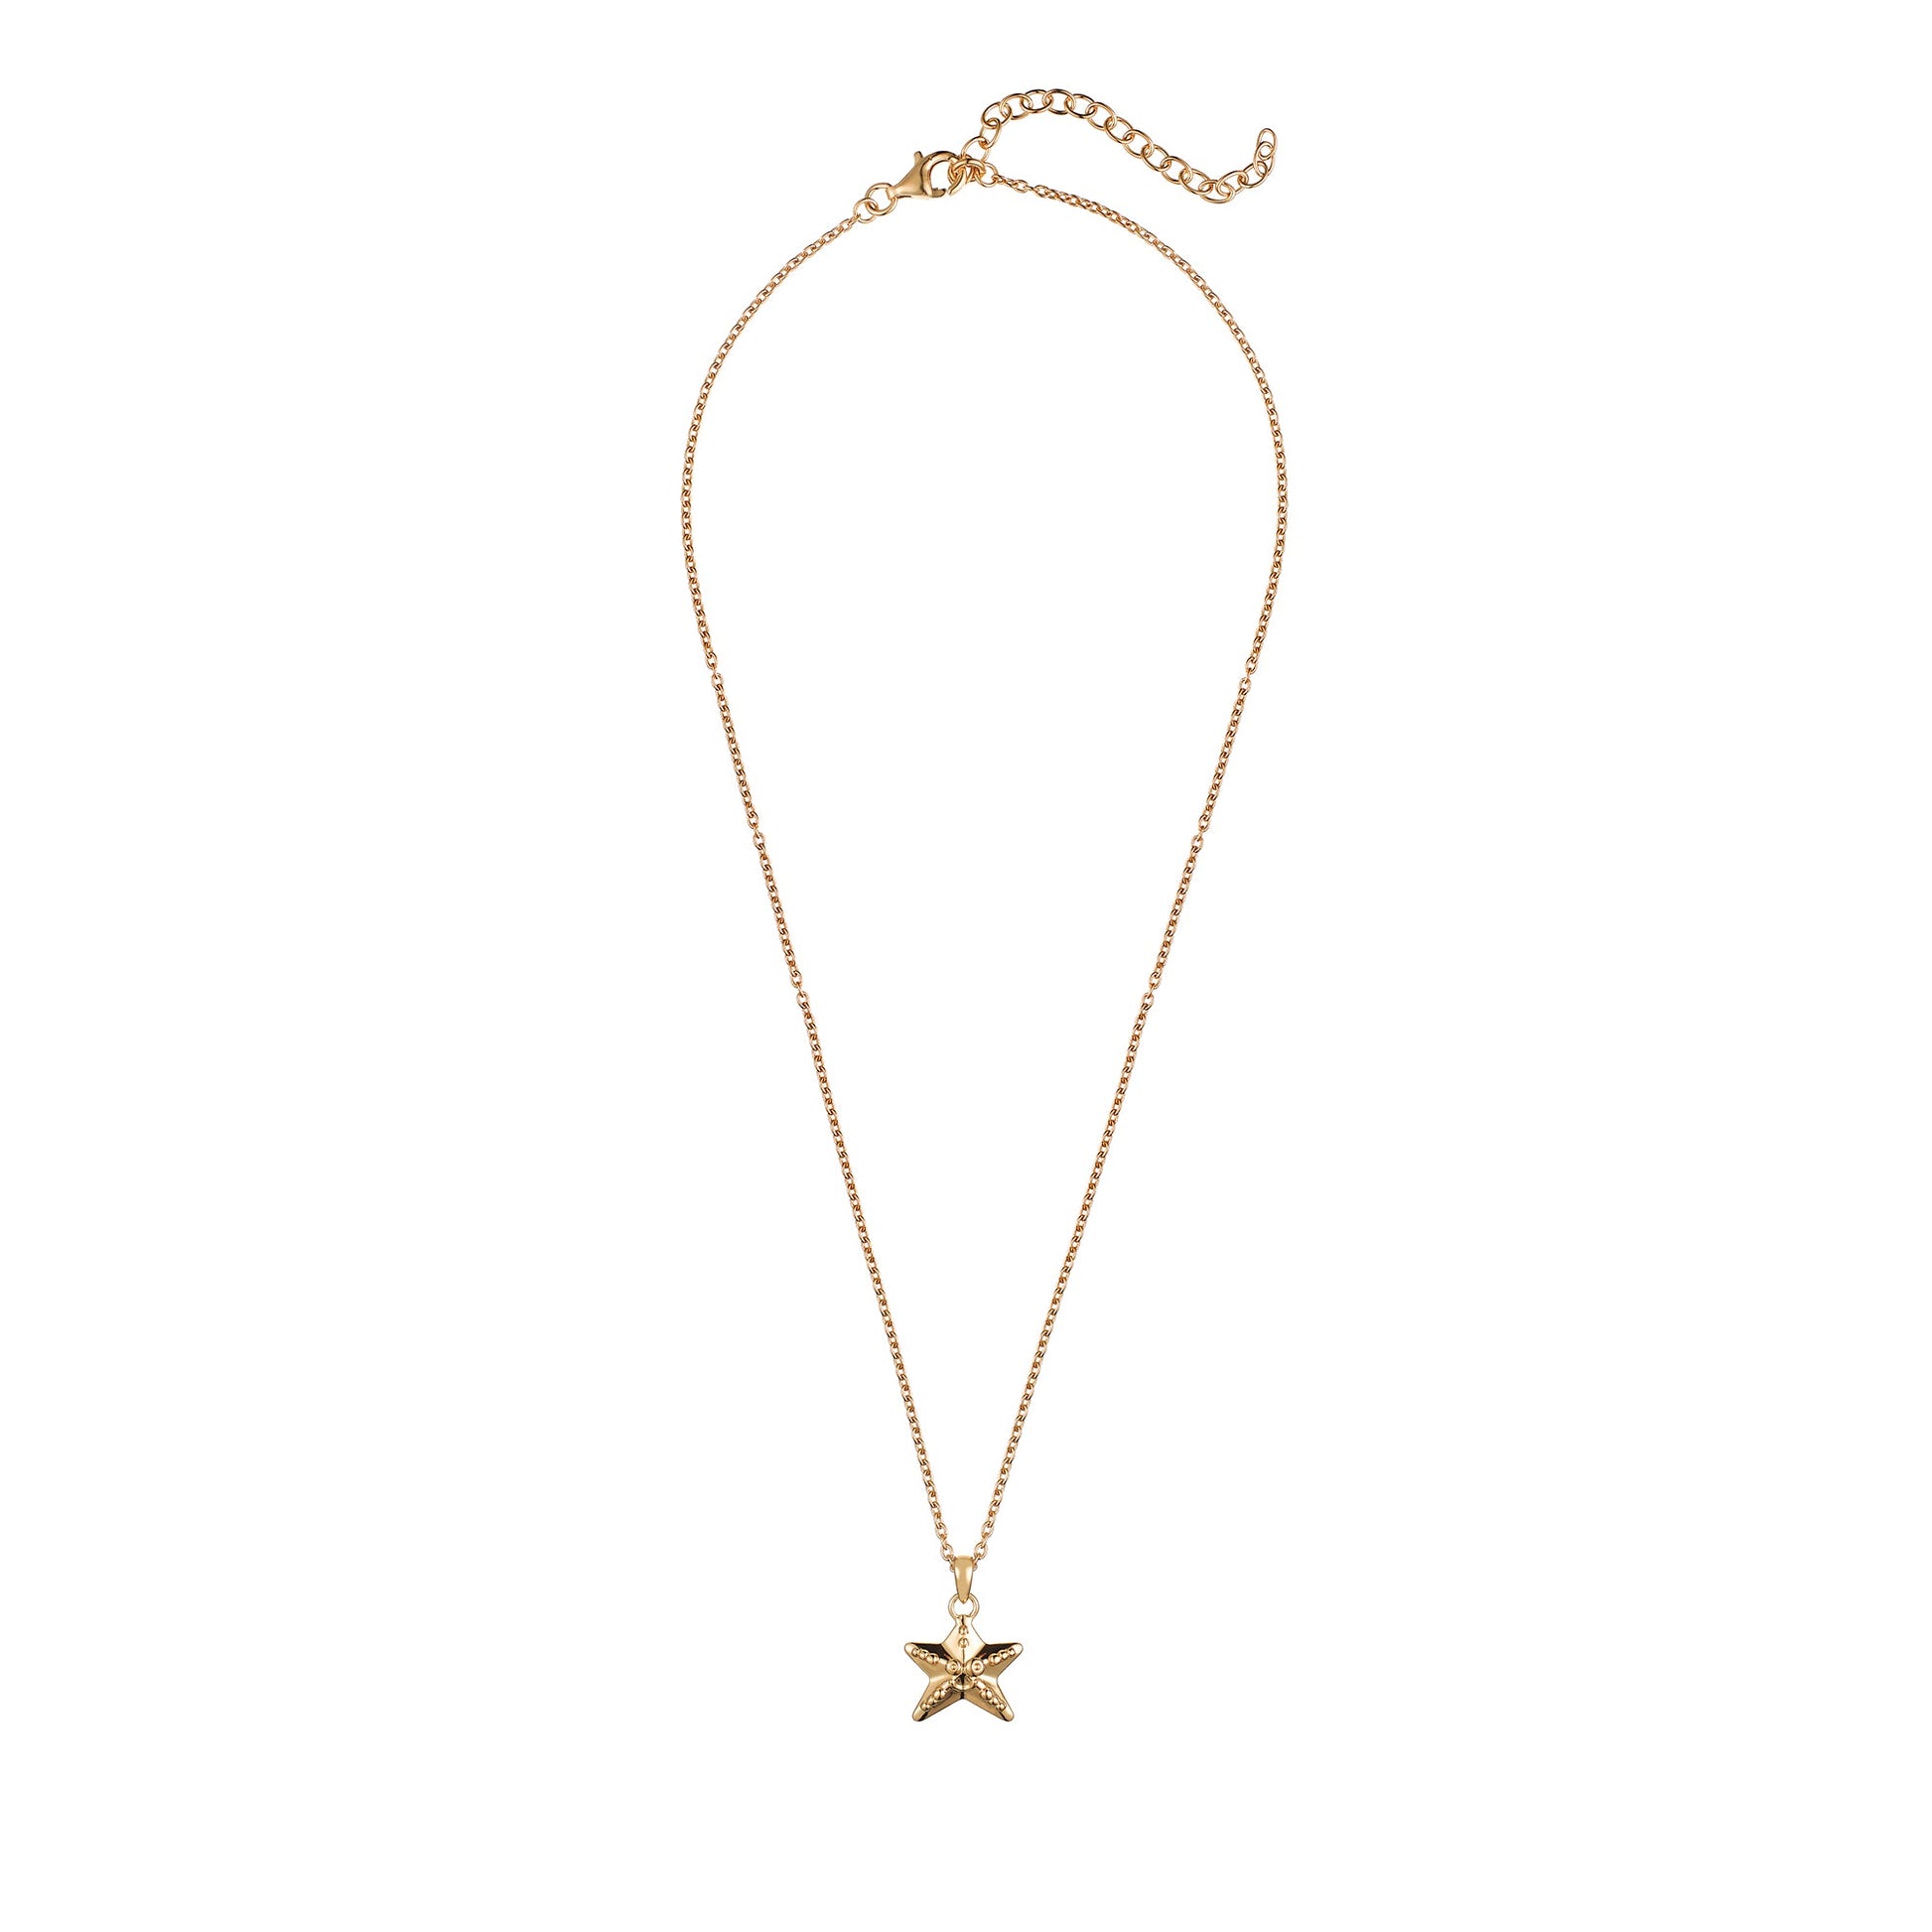 Children's Gold Starfish with Smile Pendant on an Extendable Chain Necklace